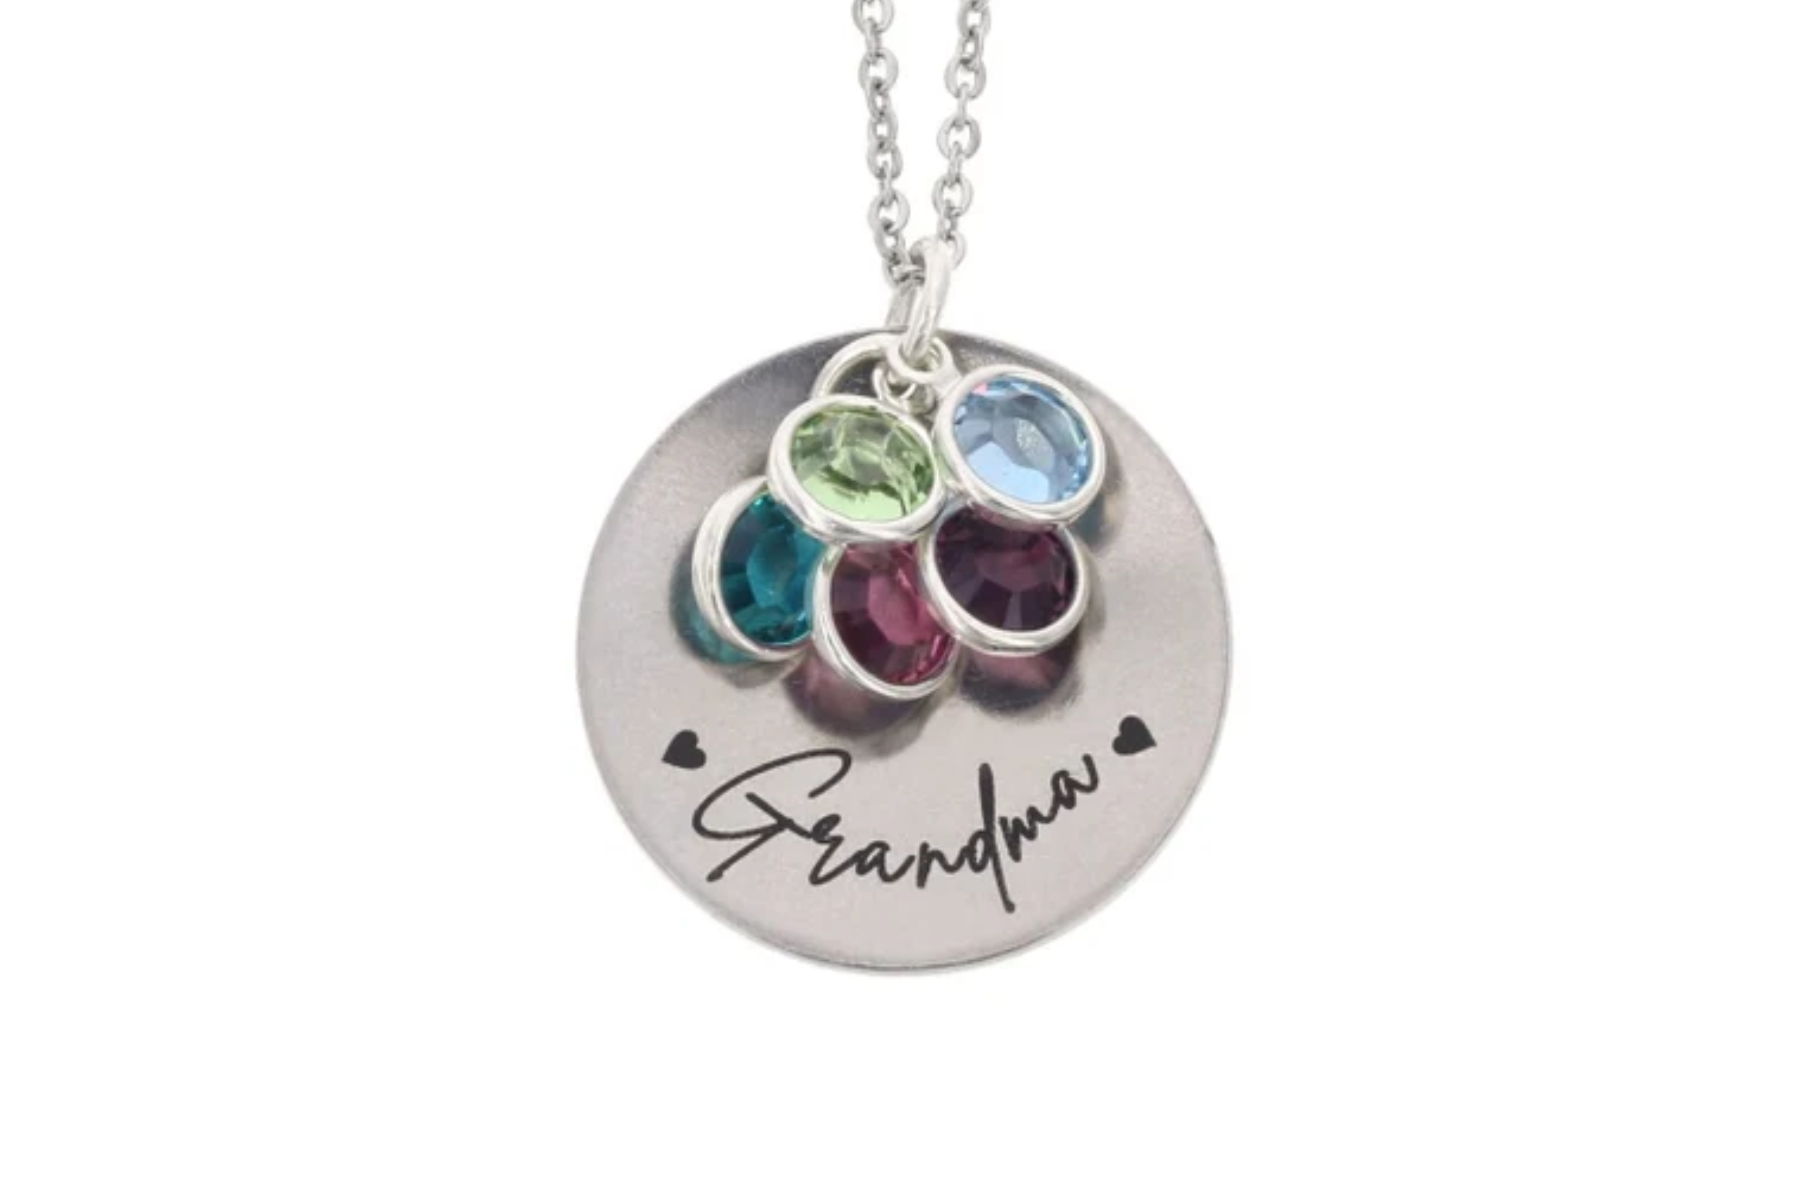 Tiny cup shapependant necklace with her name and a choice of crystal colors